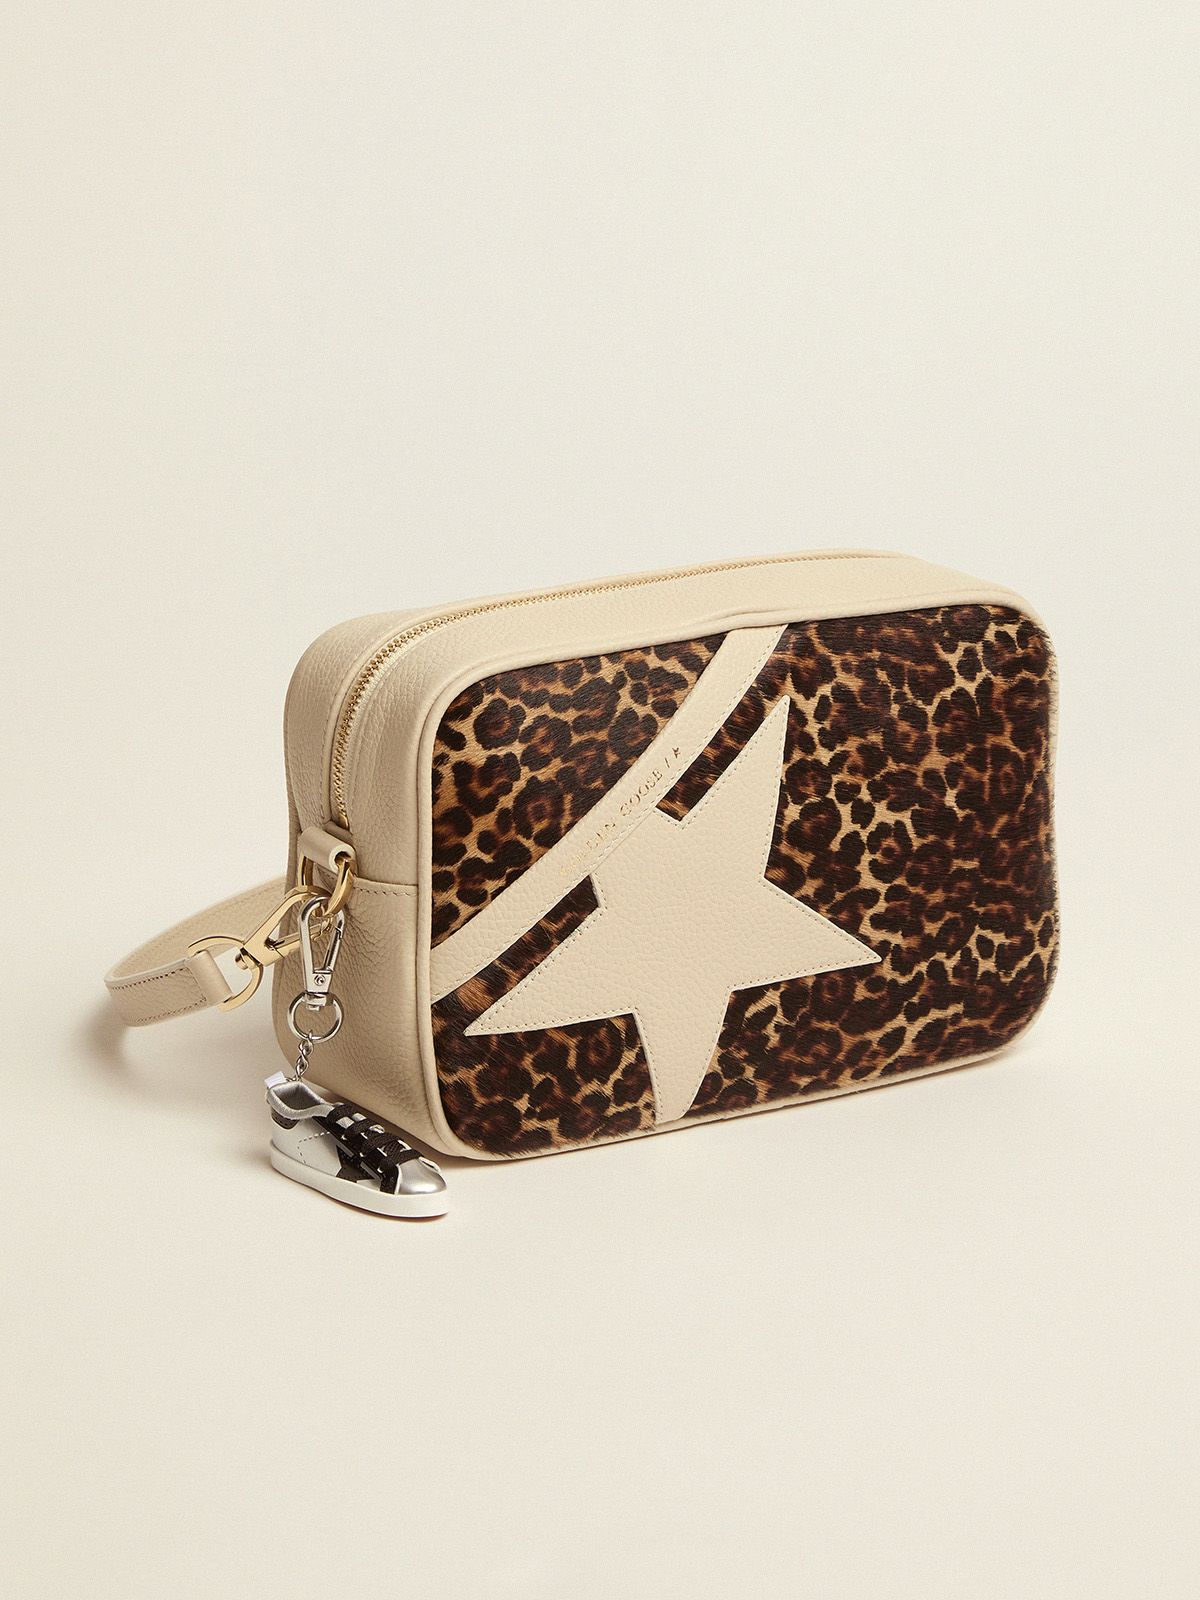 Off-white Star Bag with leopard-print pony insert | Golden Goose